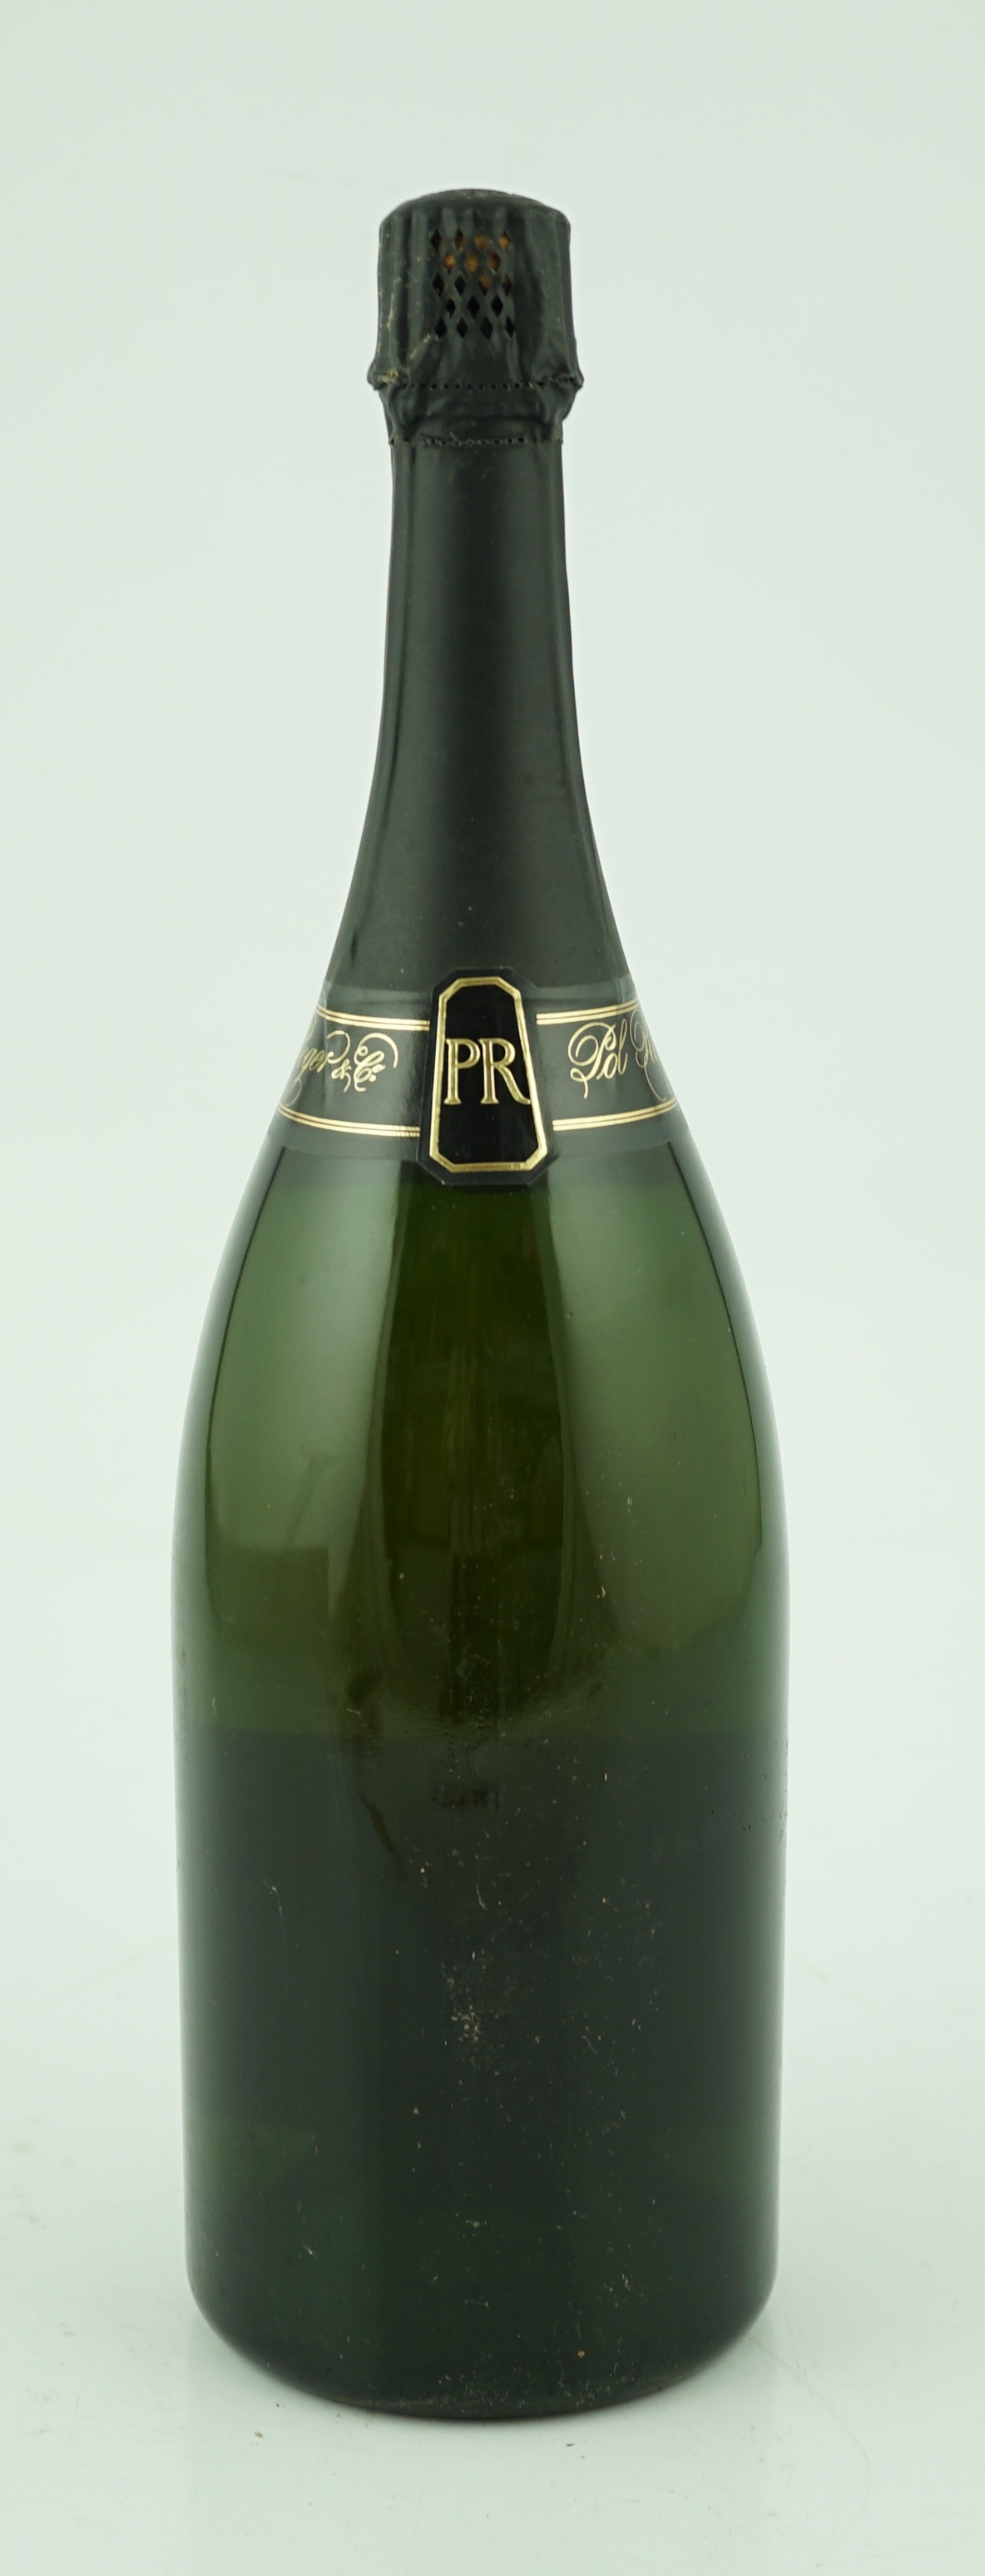 A magnum of champagne Pol Roger Cuvée Sir Winston Churchill 1975